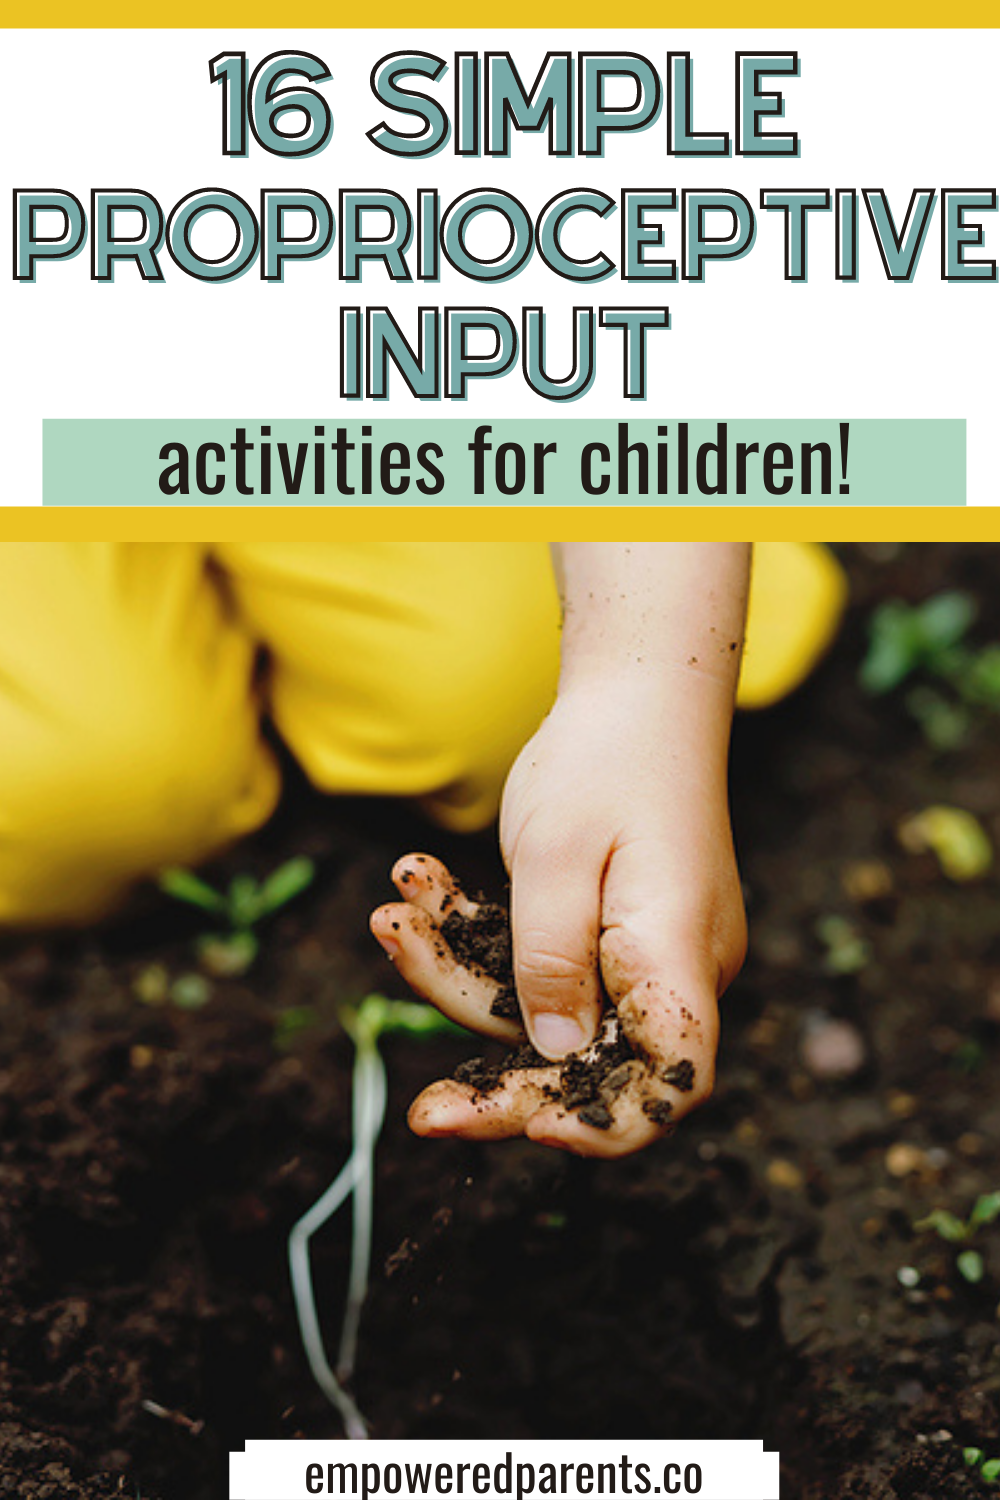 Child's hand digging in the garden soil. Text reads "16 simple proprioceptive input activities for children".